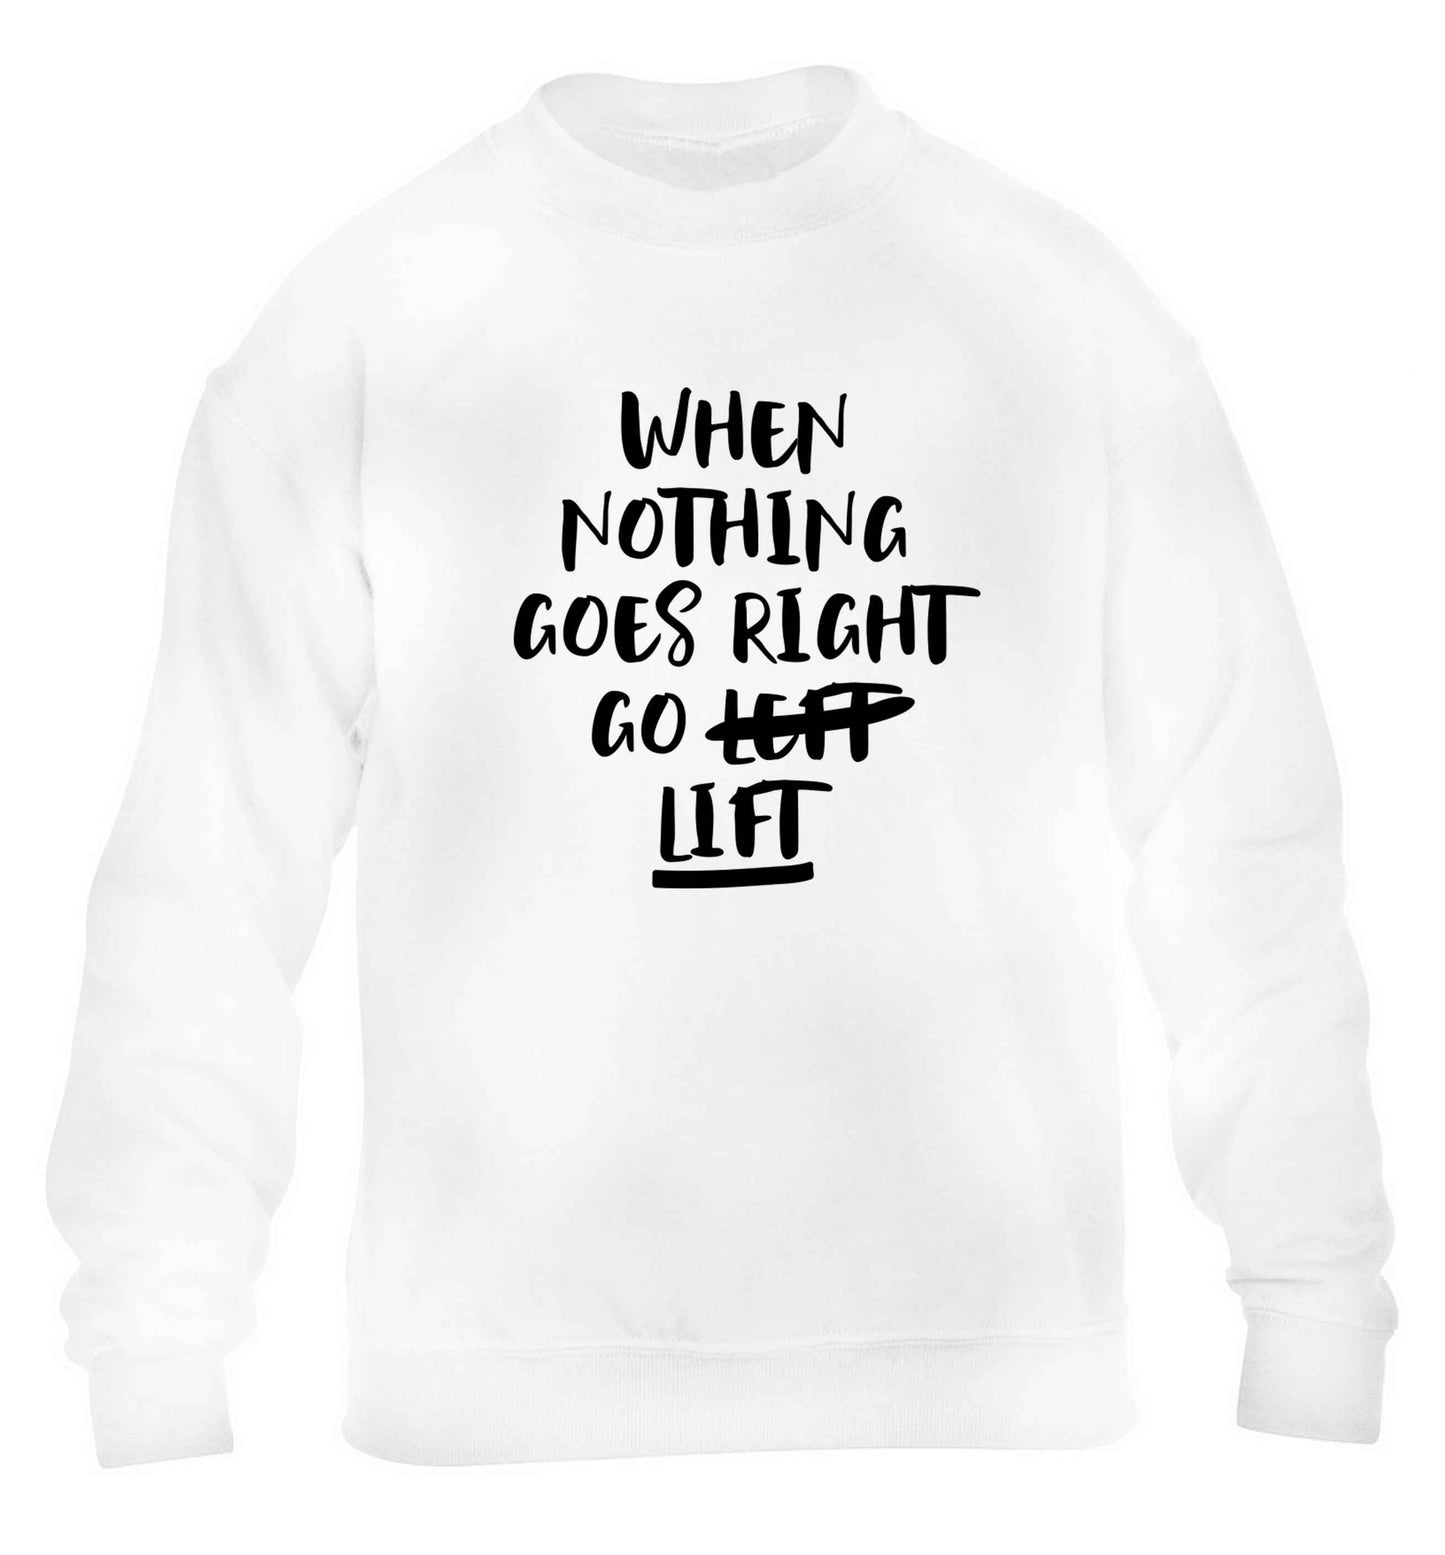 When nothing goes right go lift children's white sweater 12-13 Years